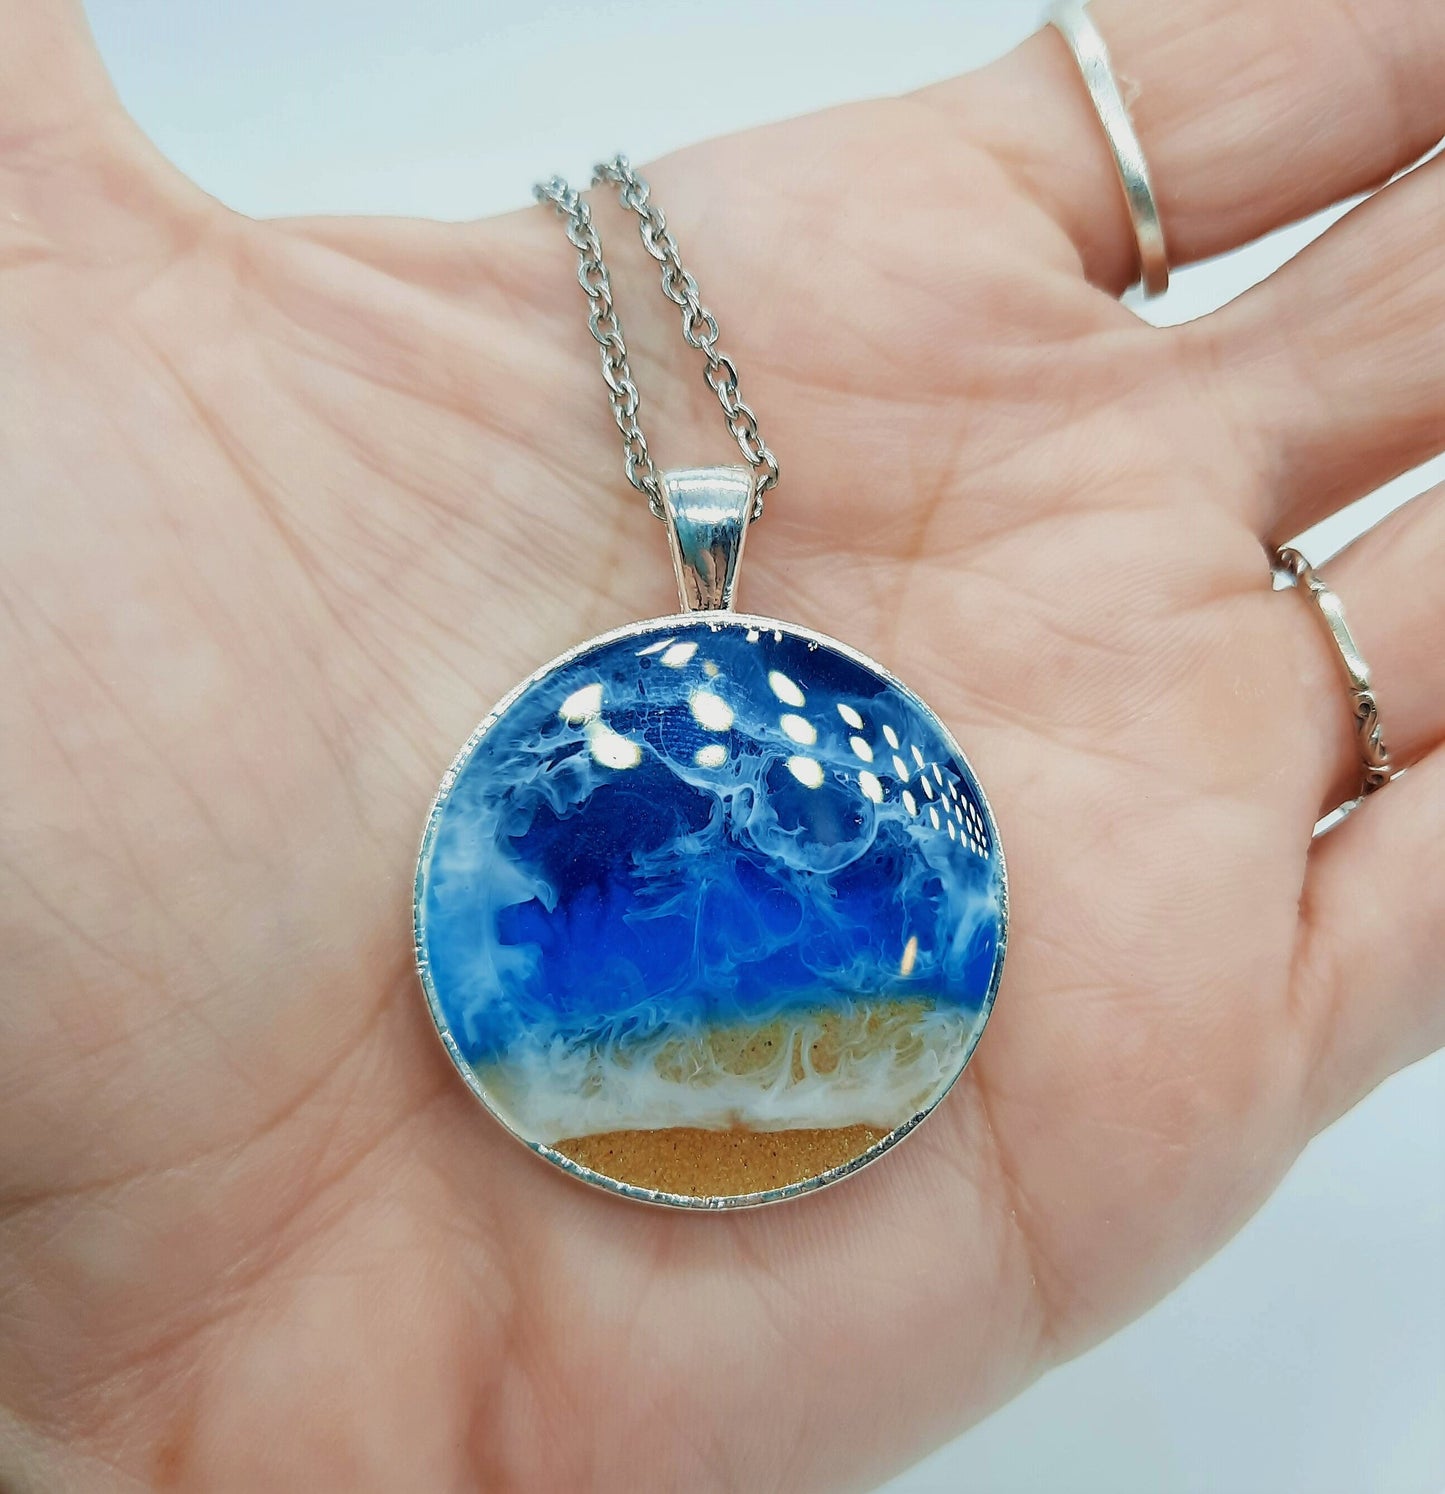 Resin Waves Large Round Shaped Ocean Pendant / Beach Scene Necklace, Handmade with Resin & Real Sand - One of a Kind - Not a Photograph!